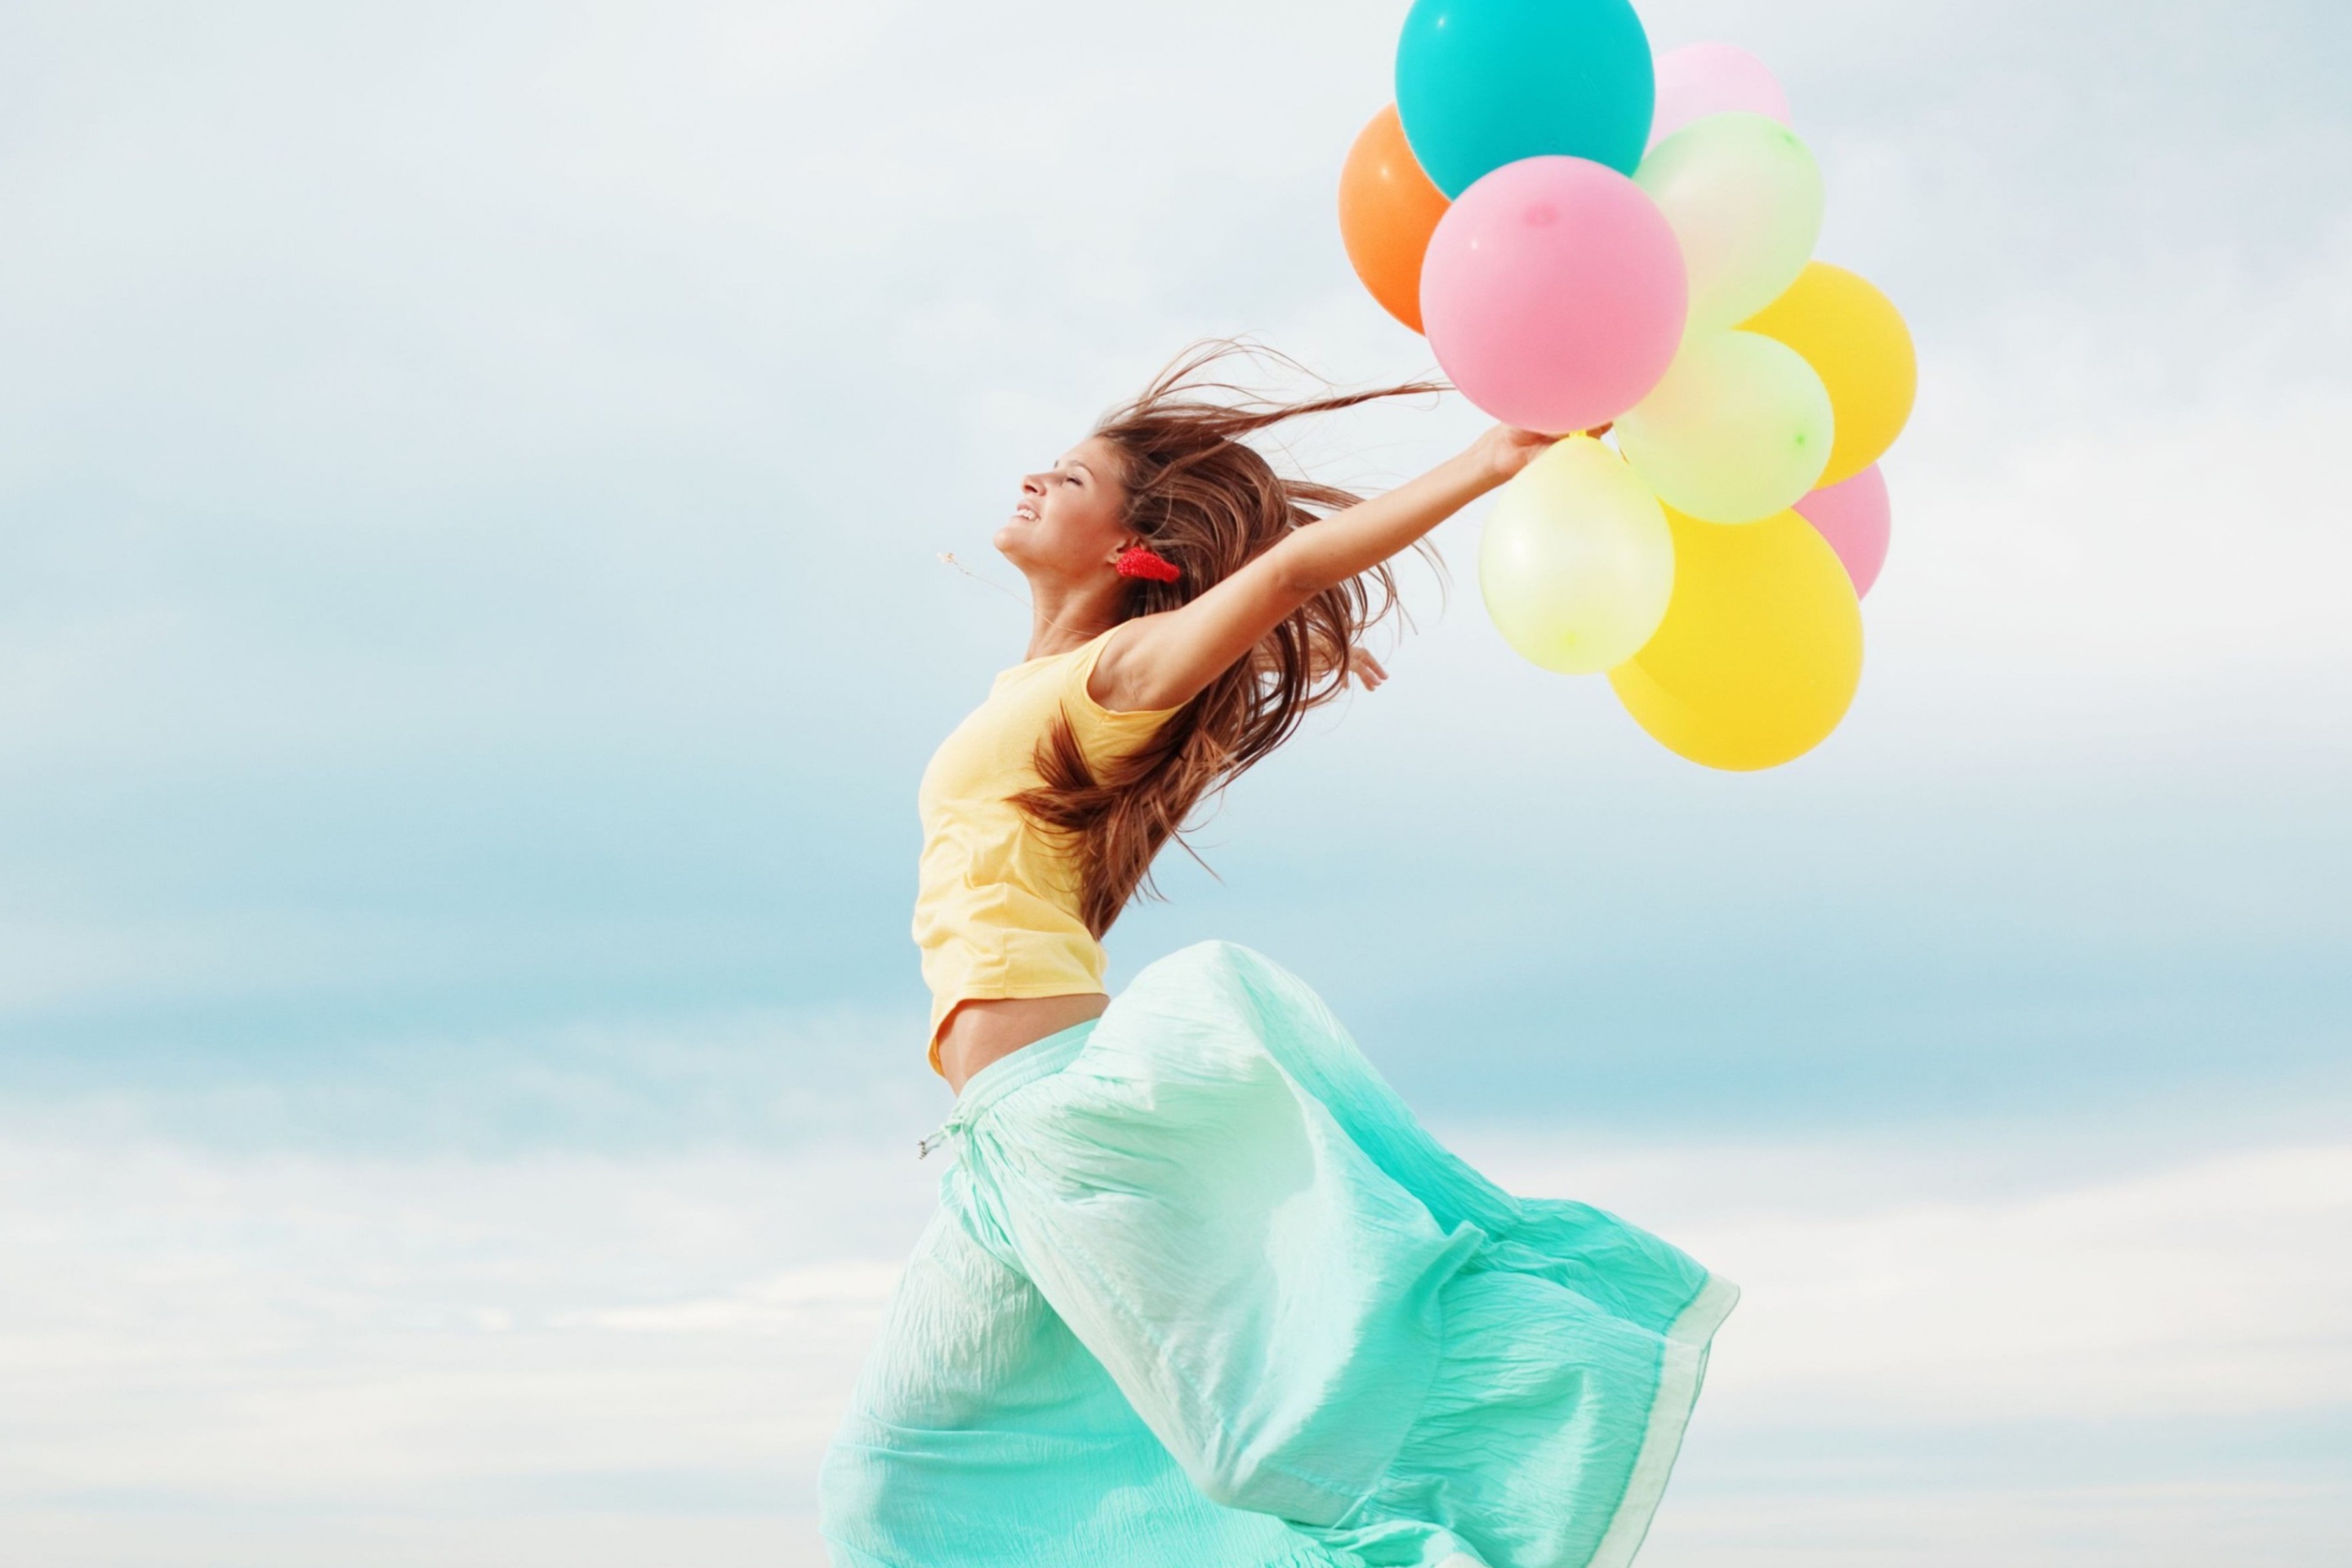 Girl With Colorful Balloons wallpaper 2880x1920